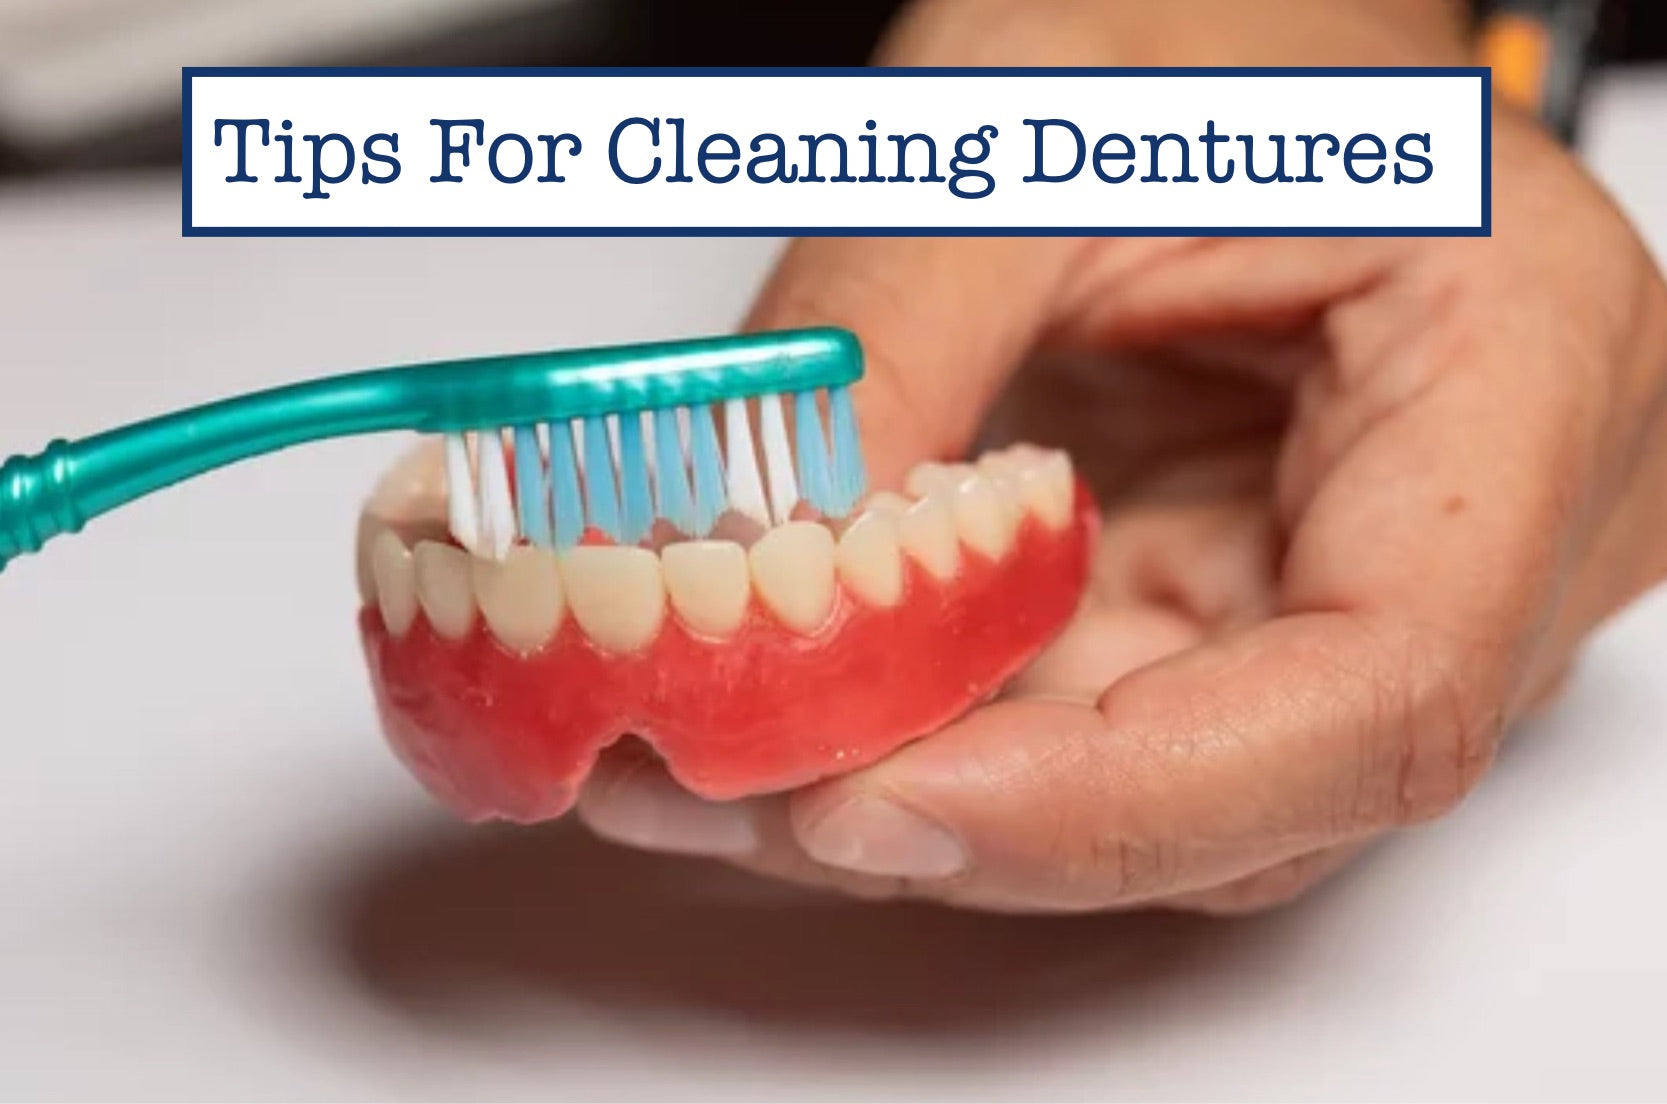 Tips For Cleaning Dentures